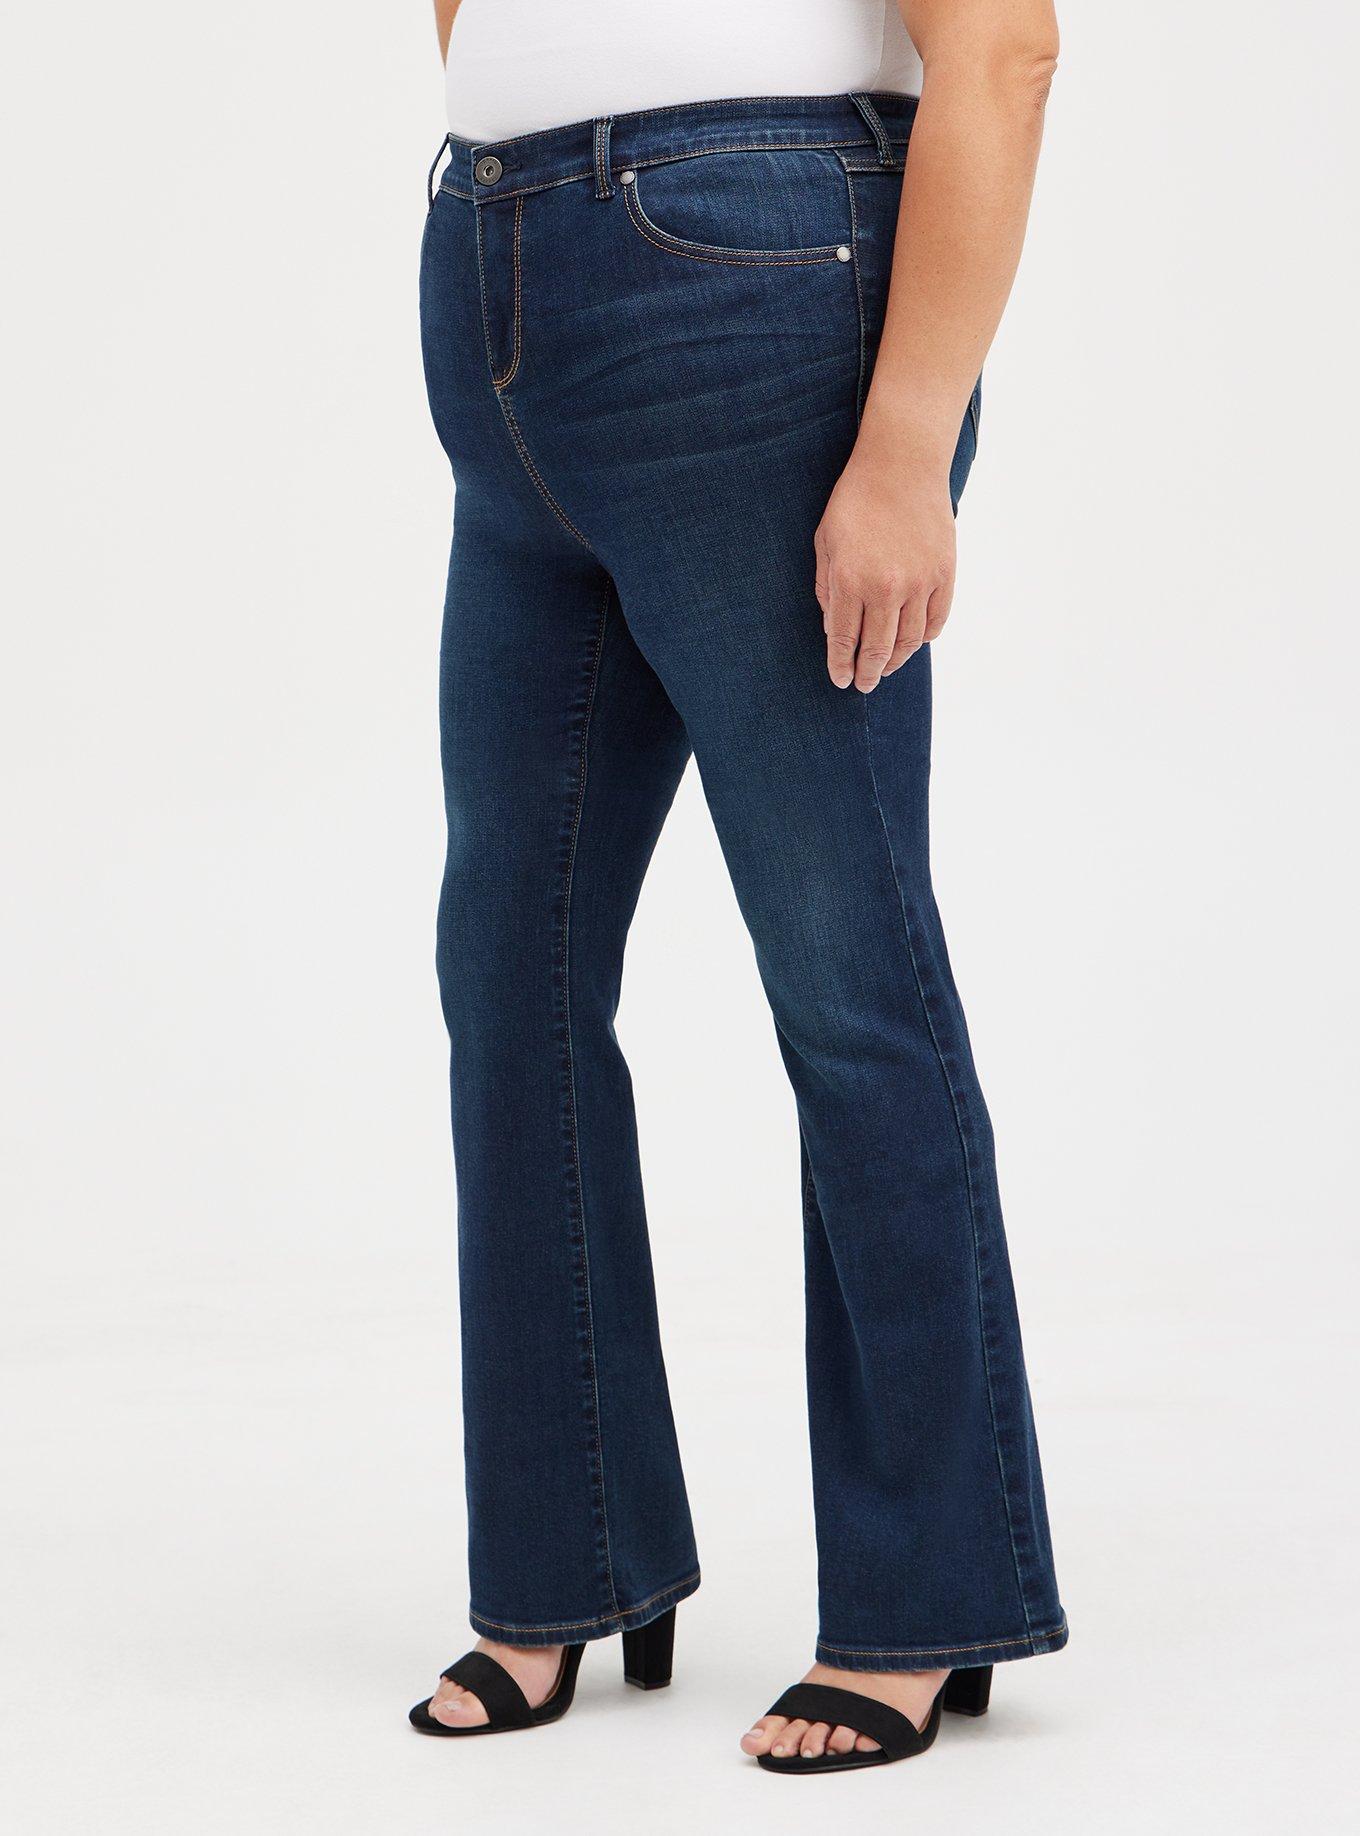 I'm Curvy and Live for Baggy Denim—15 Pairs I Swear By